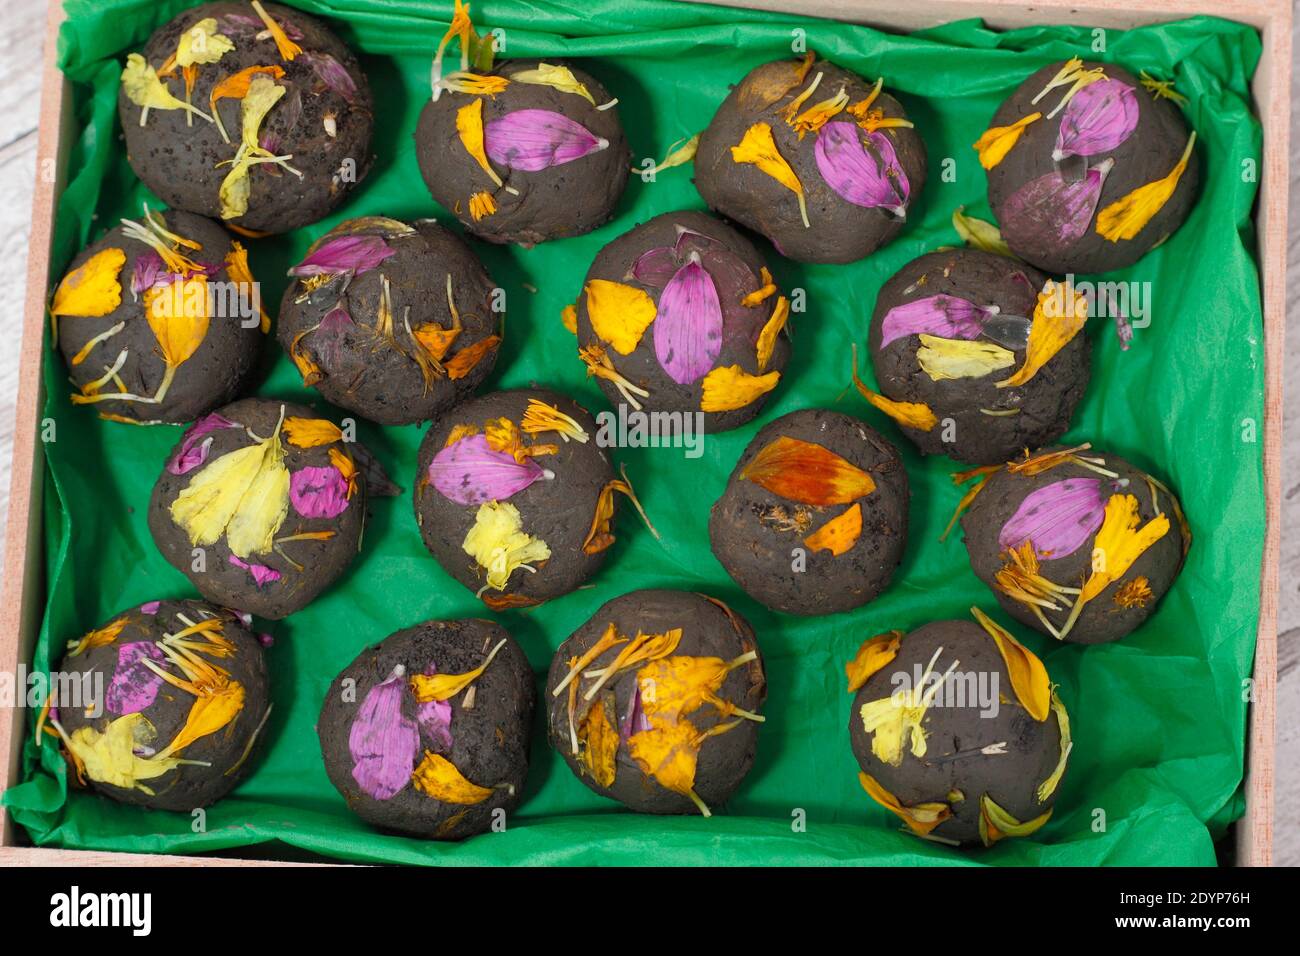 Home made flower bombs, or seed balls, made with clay soil embedded with various flower seeds and embellished with petals. UK Stock Photo